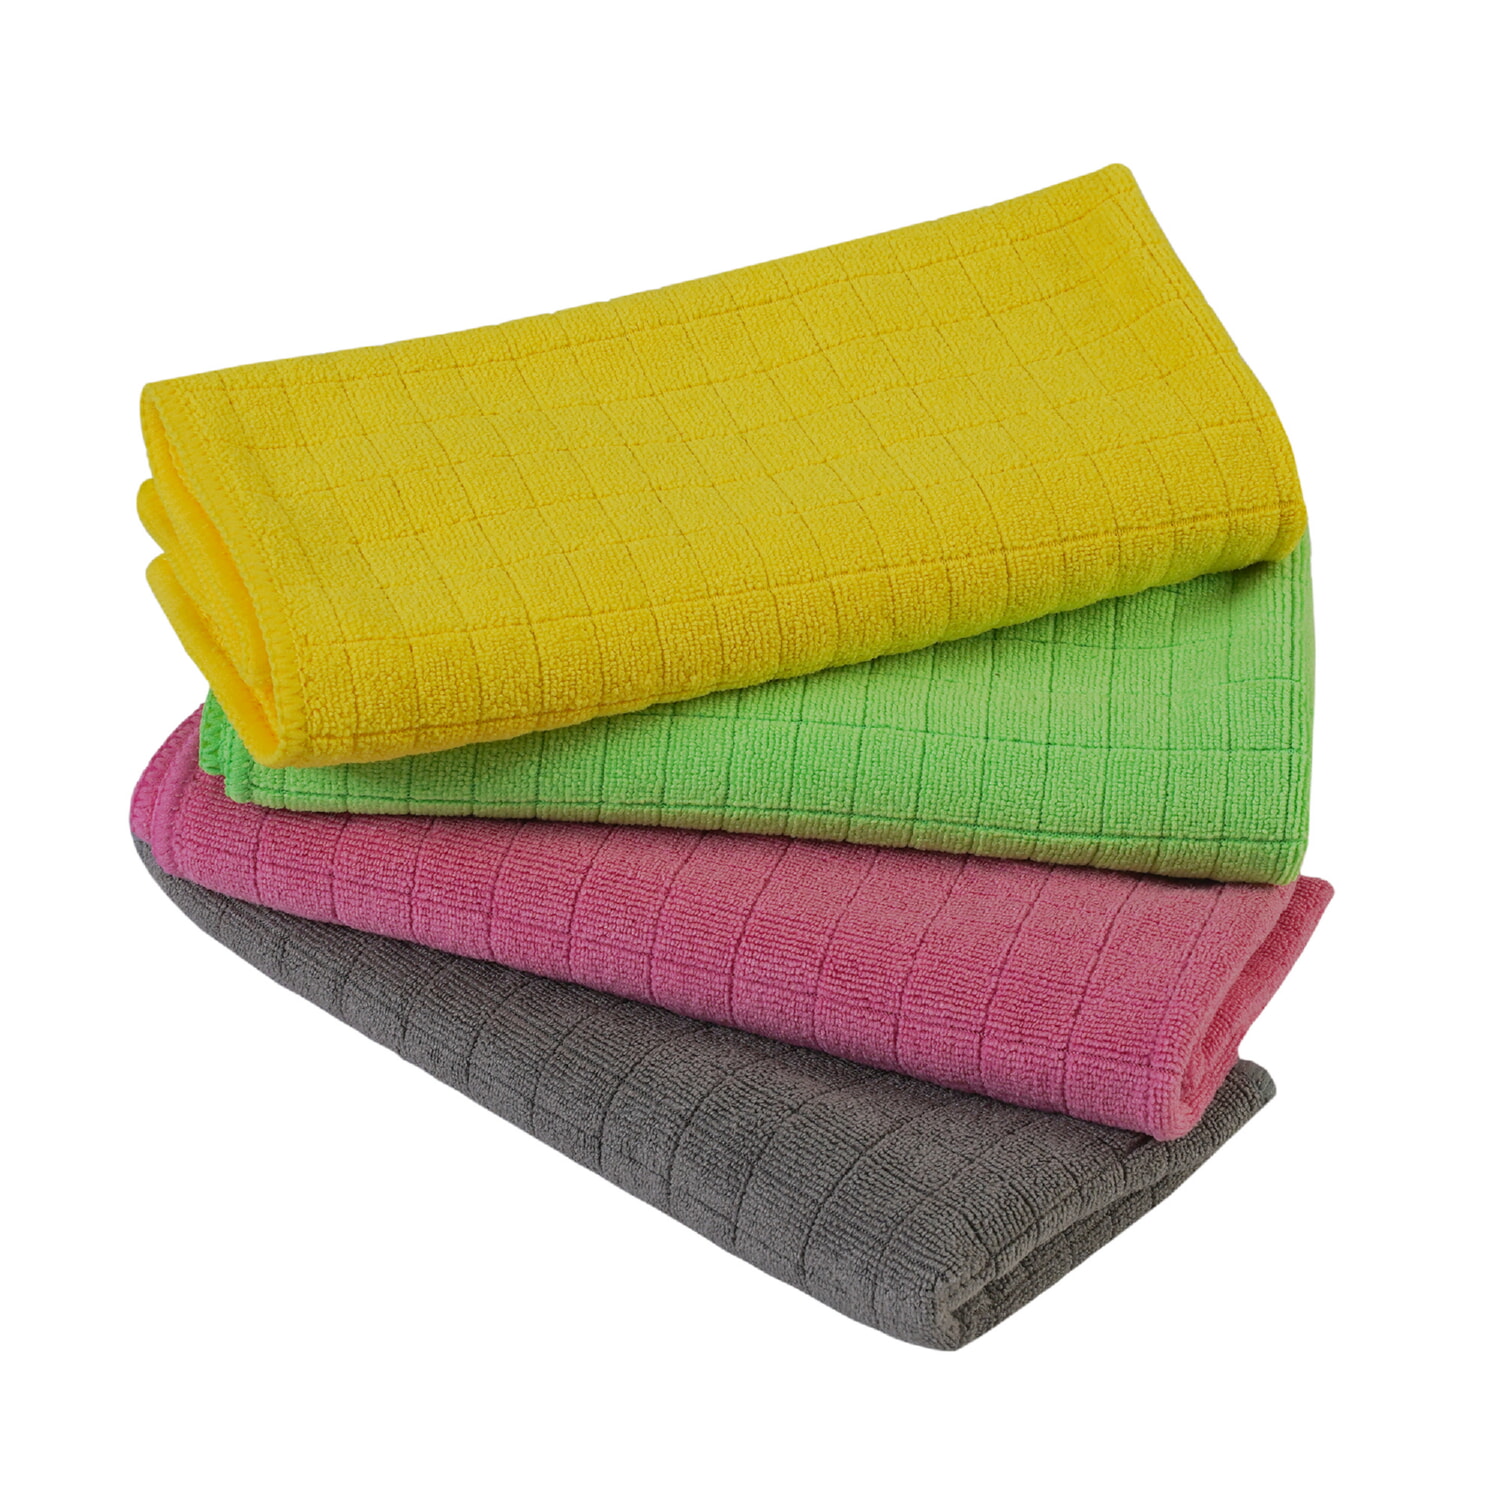 40X40 MICROFIBER LUX CLEANING CLOTH 75GR